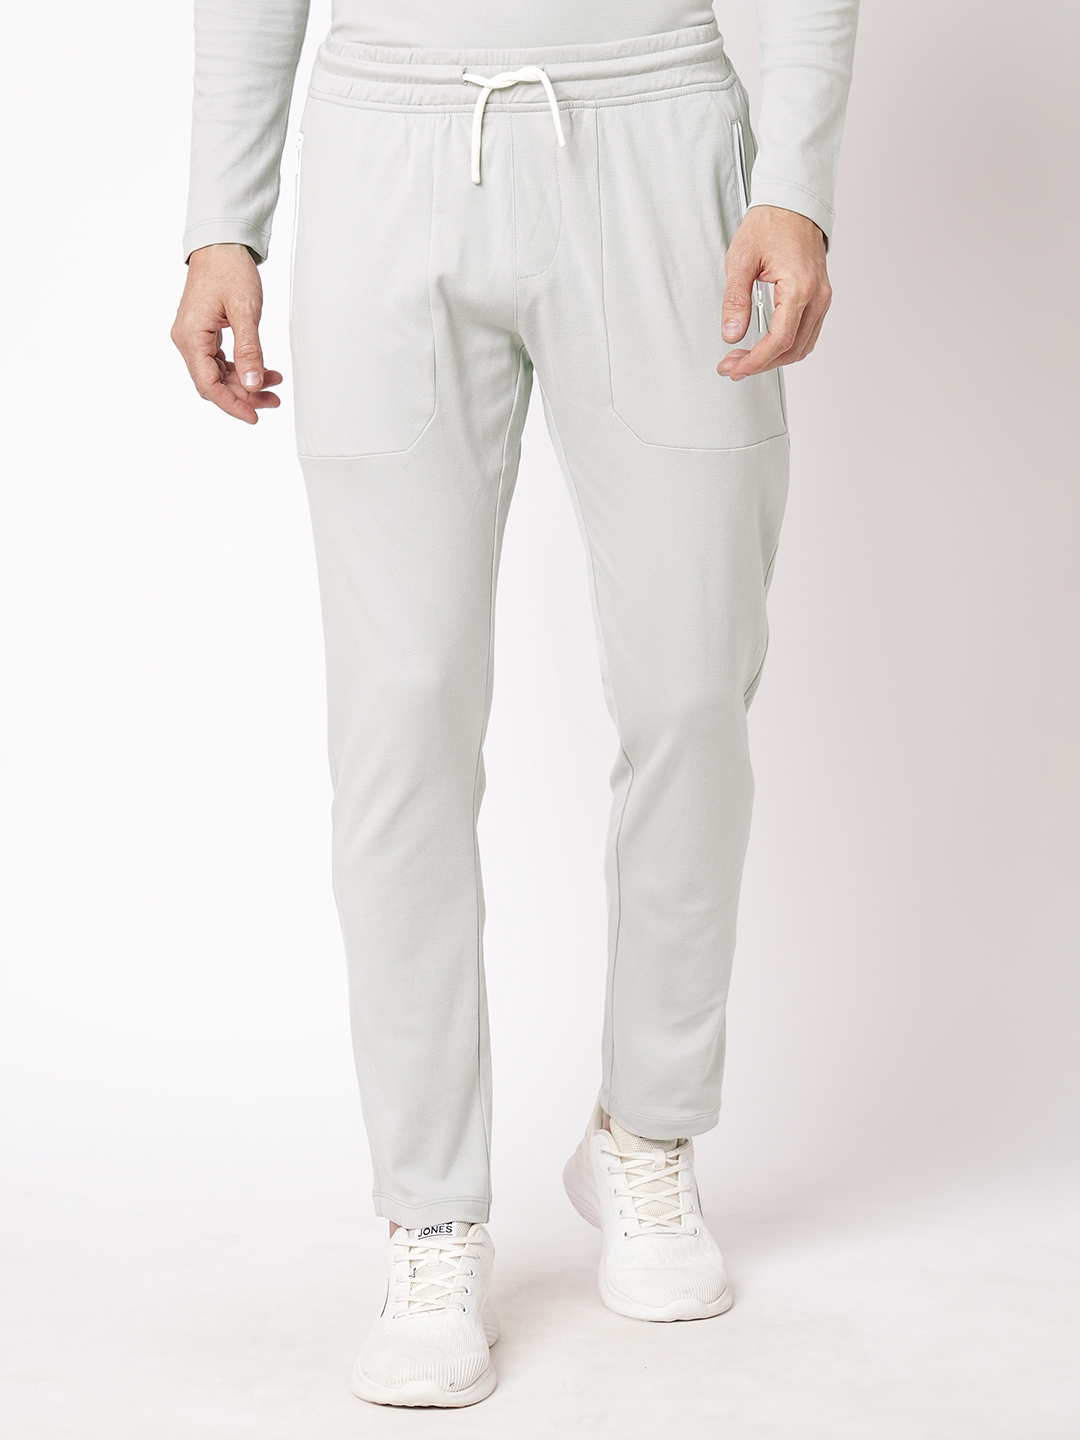 LT GREY ATHLEISURE TRACK PANT (COMFORT FIT)